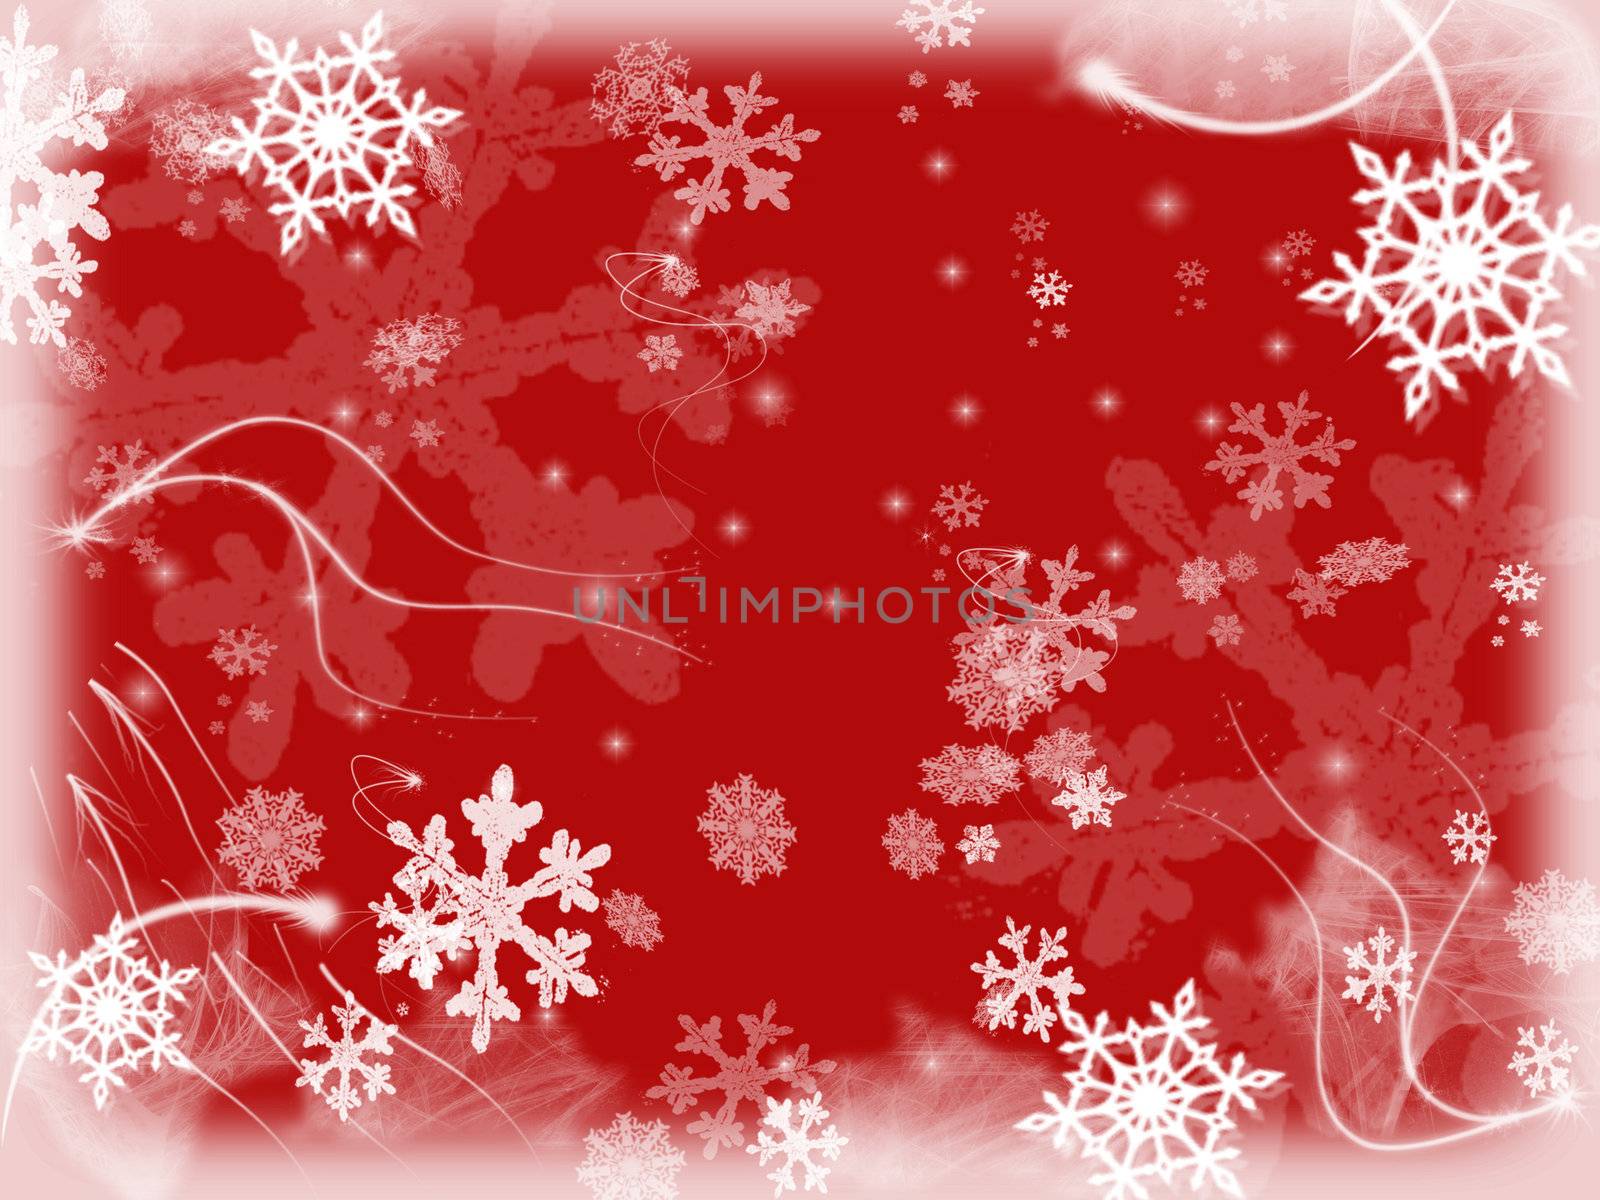 white snowflakes over red background with feather corners